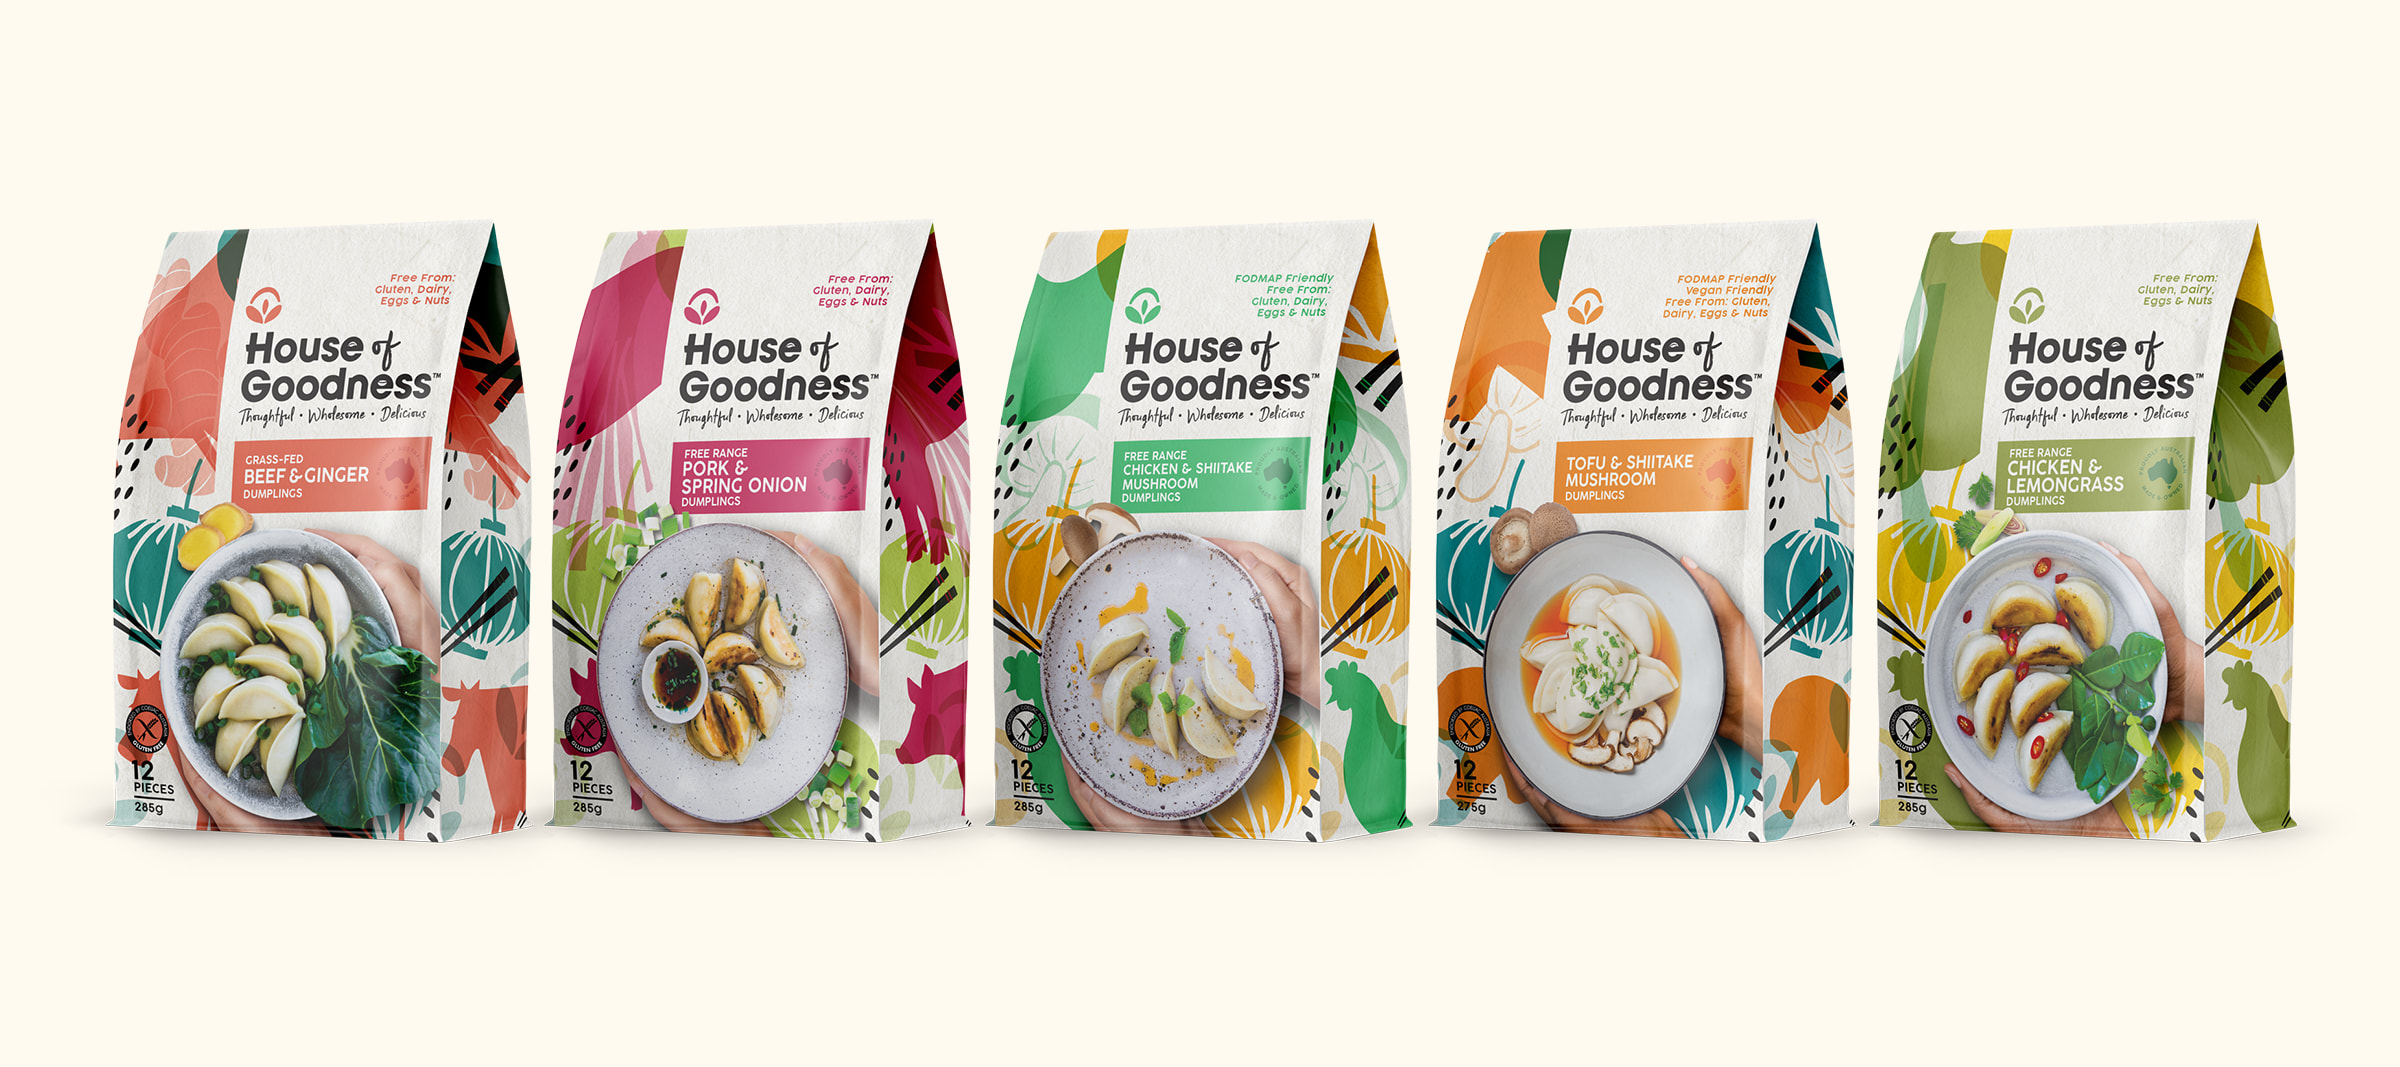 house-of-goodness-packaging-redesign-branding-boxer-and-co-marrickville-agency